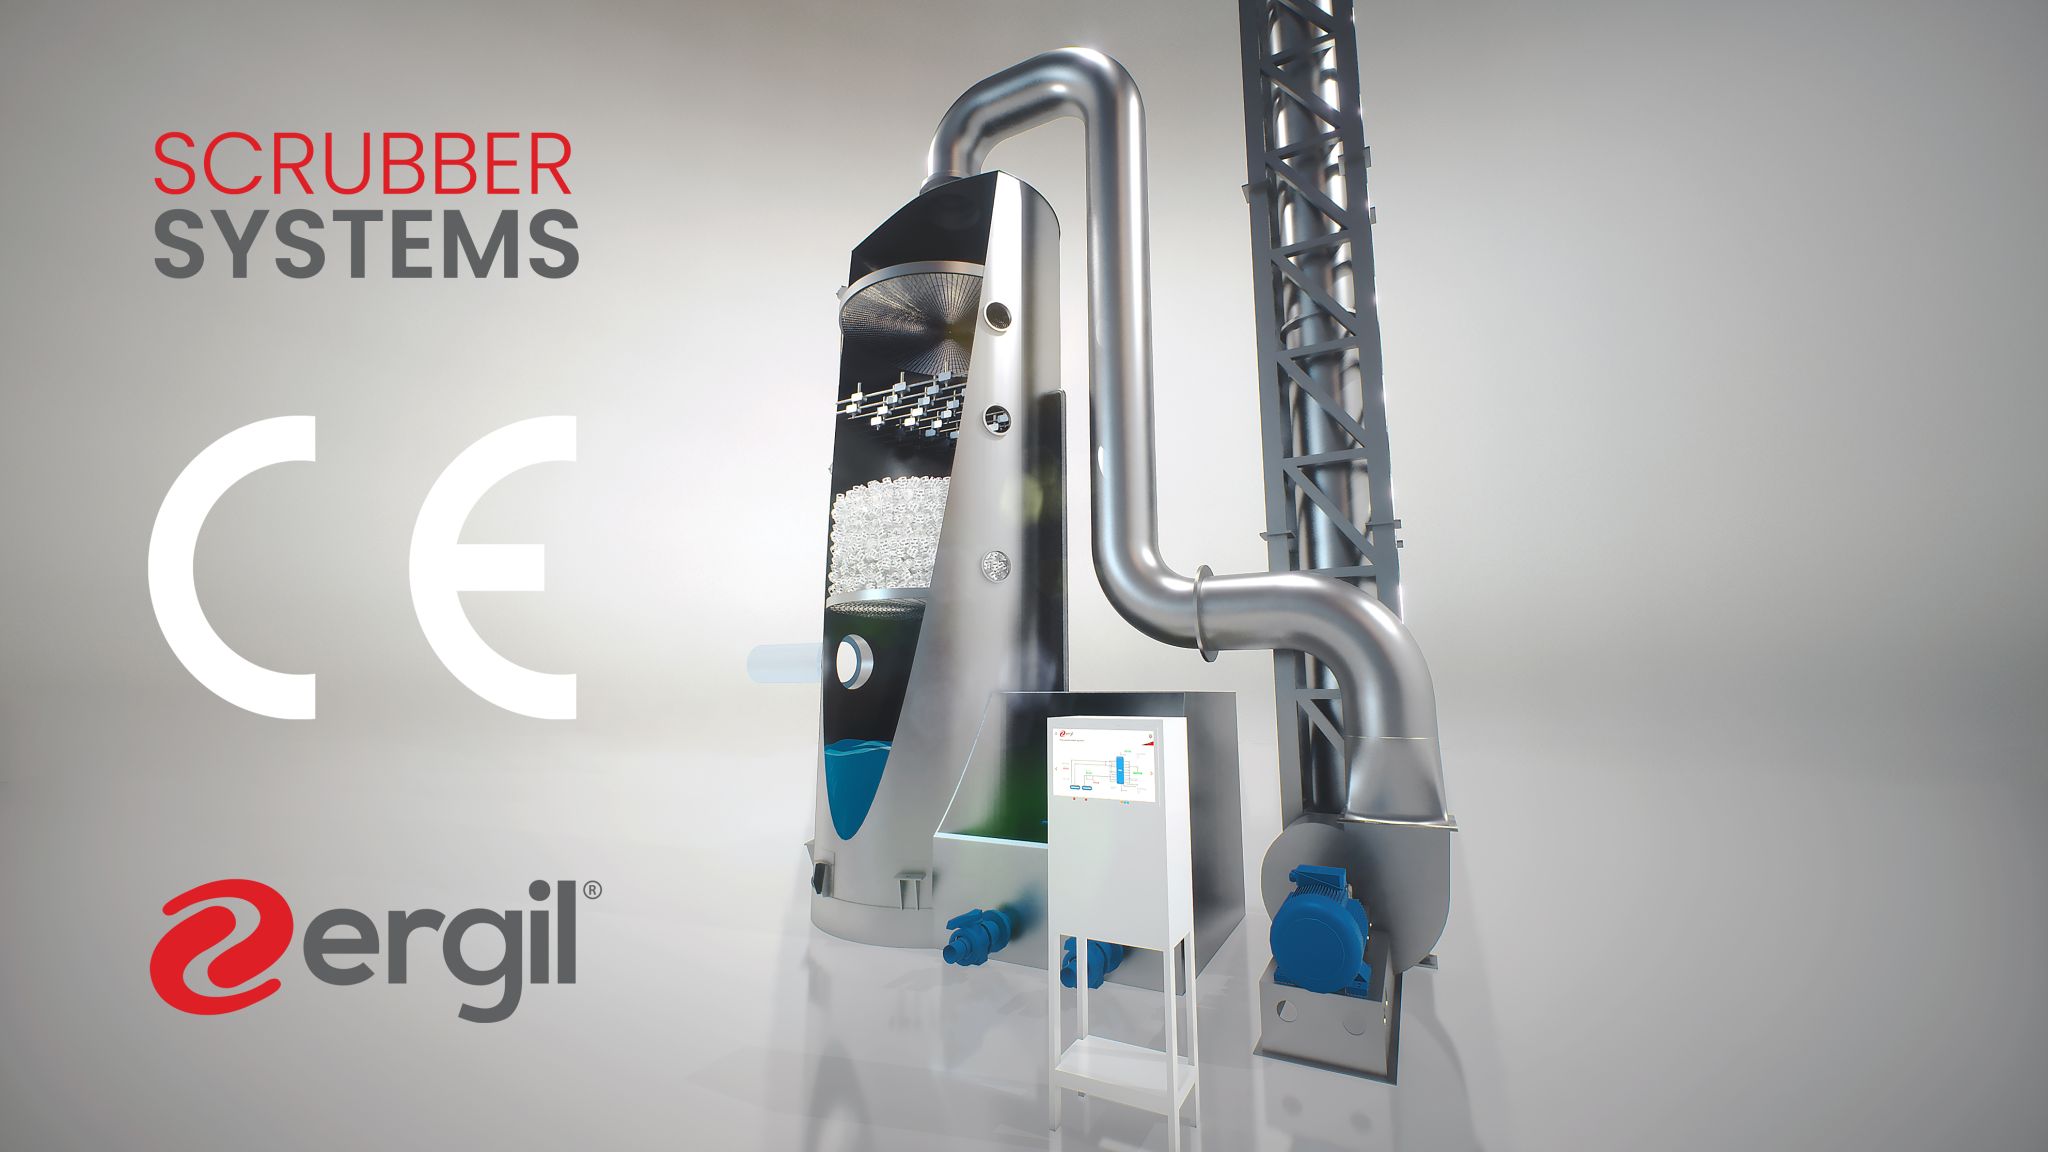 Äager GmbH, has achieved CE certification for Scrubber Systems 44